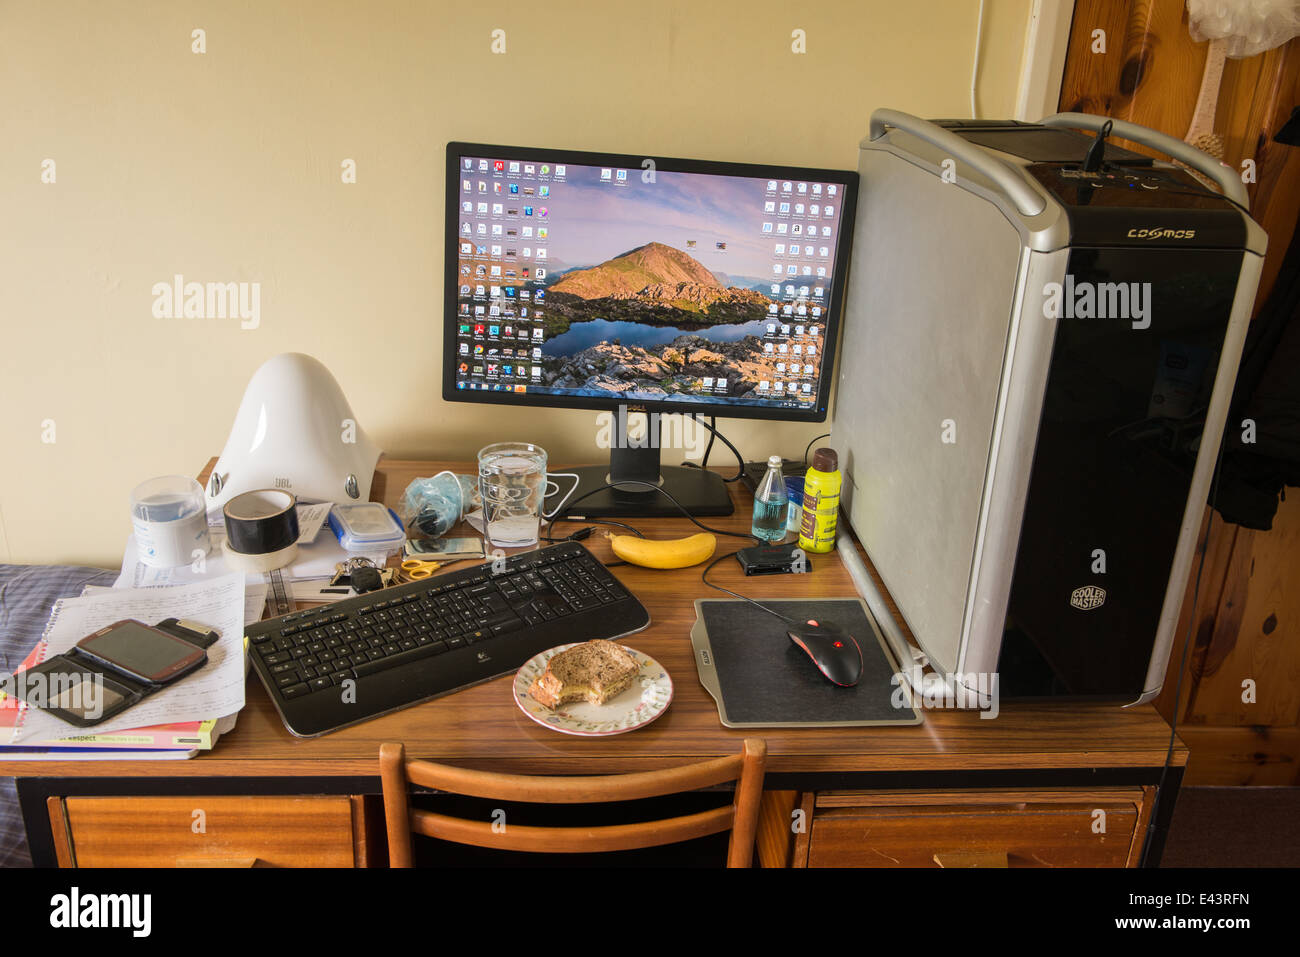 Cluttered Computer Desk Stock Photo 71384425 Alamy